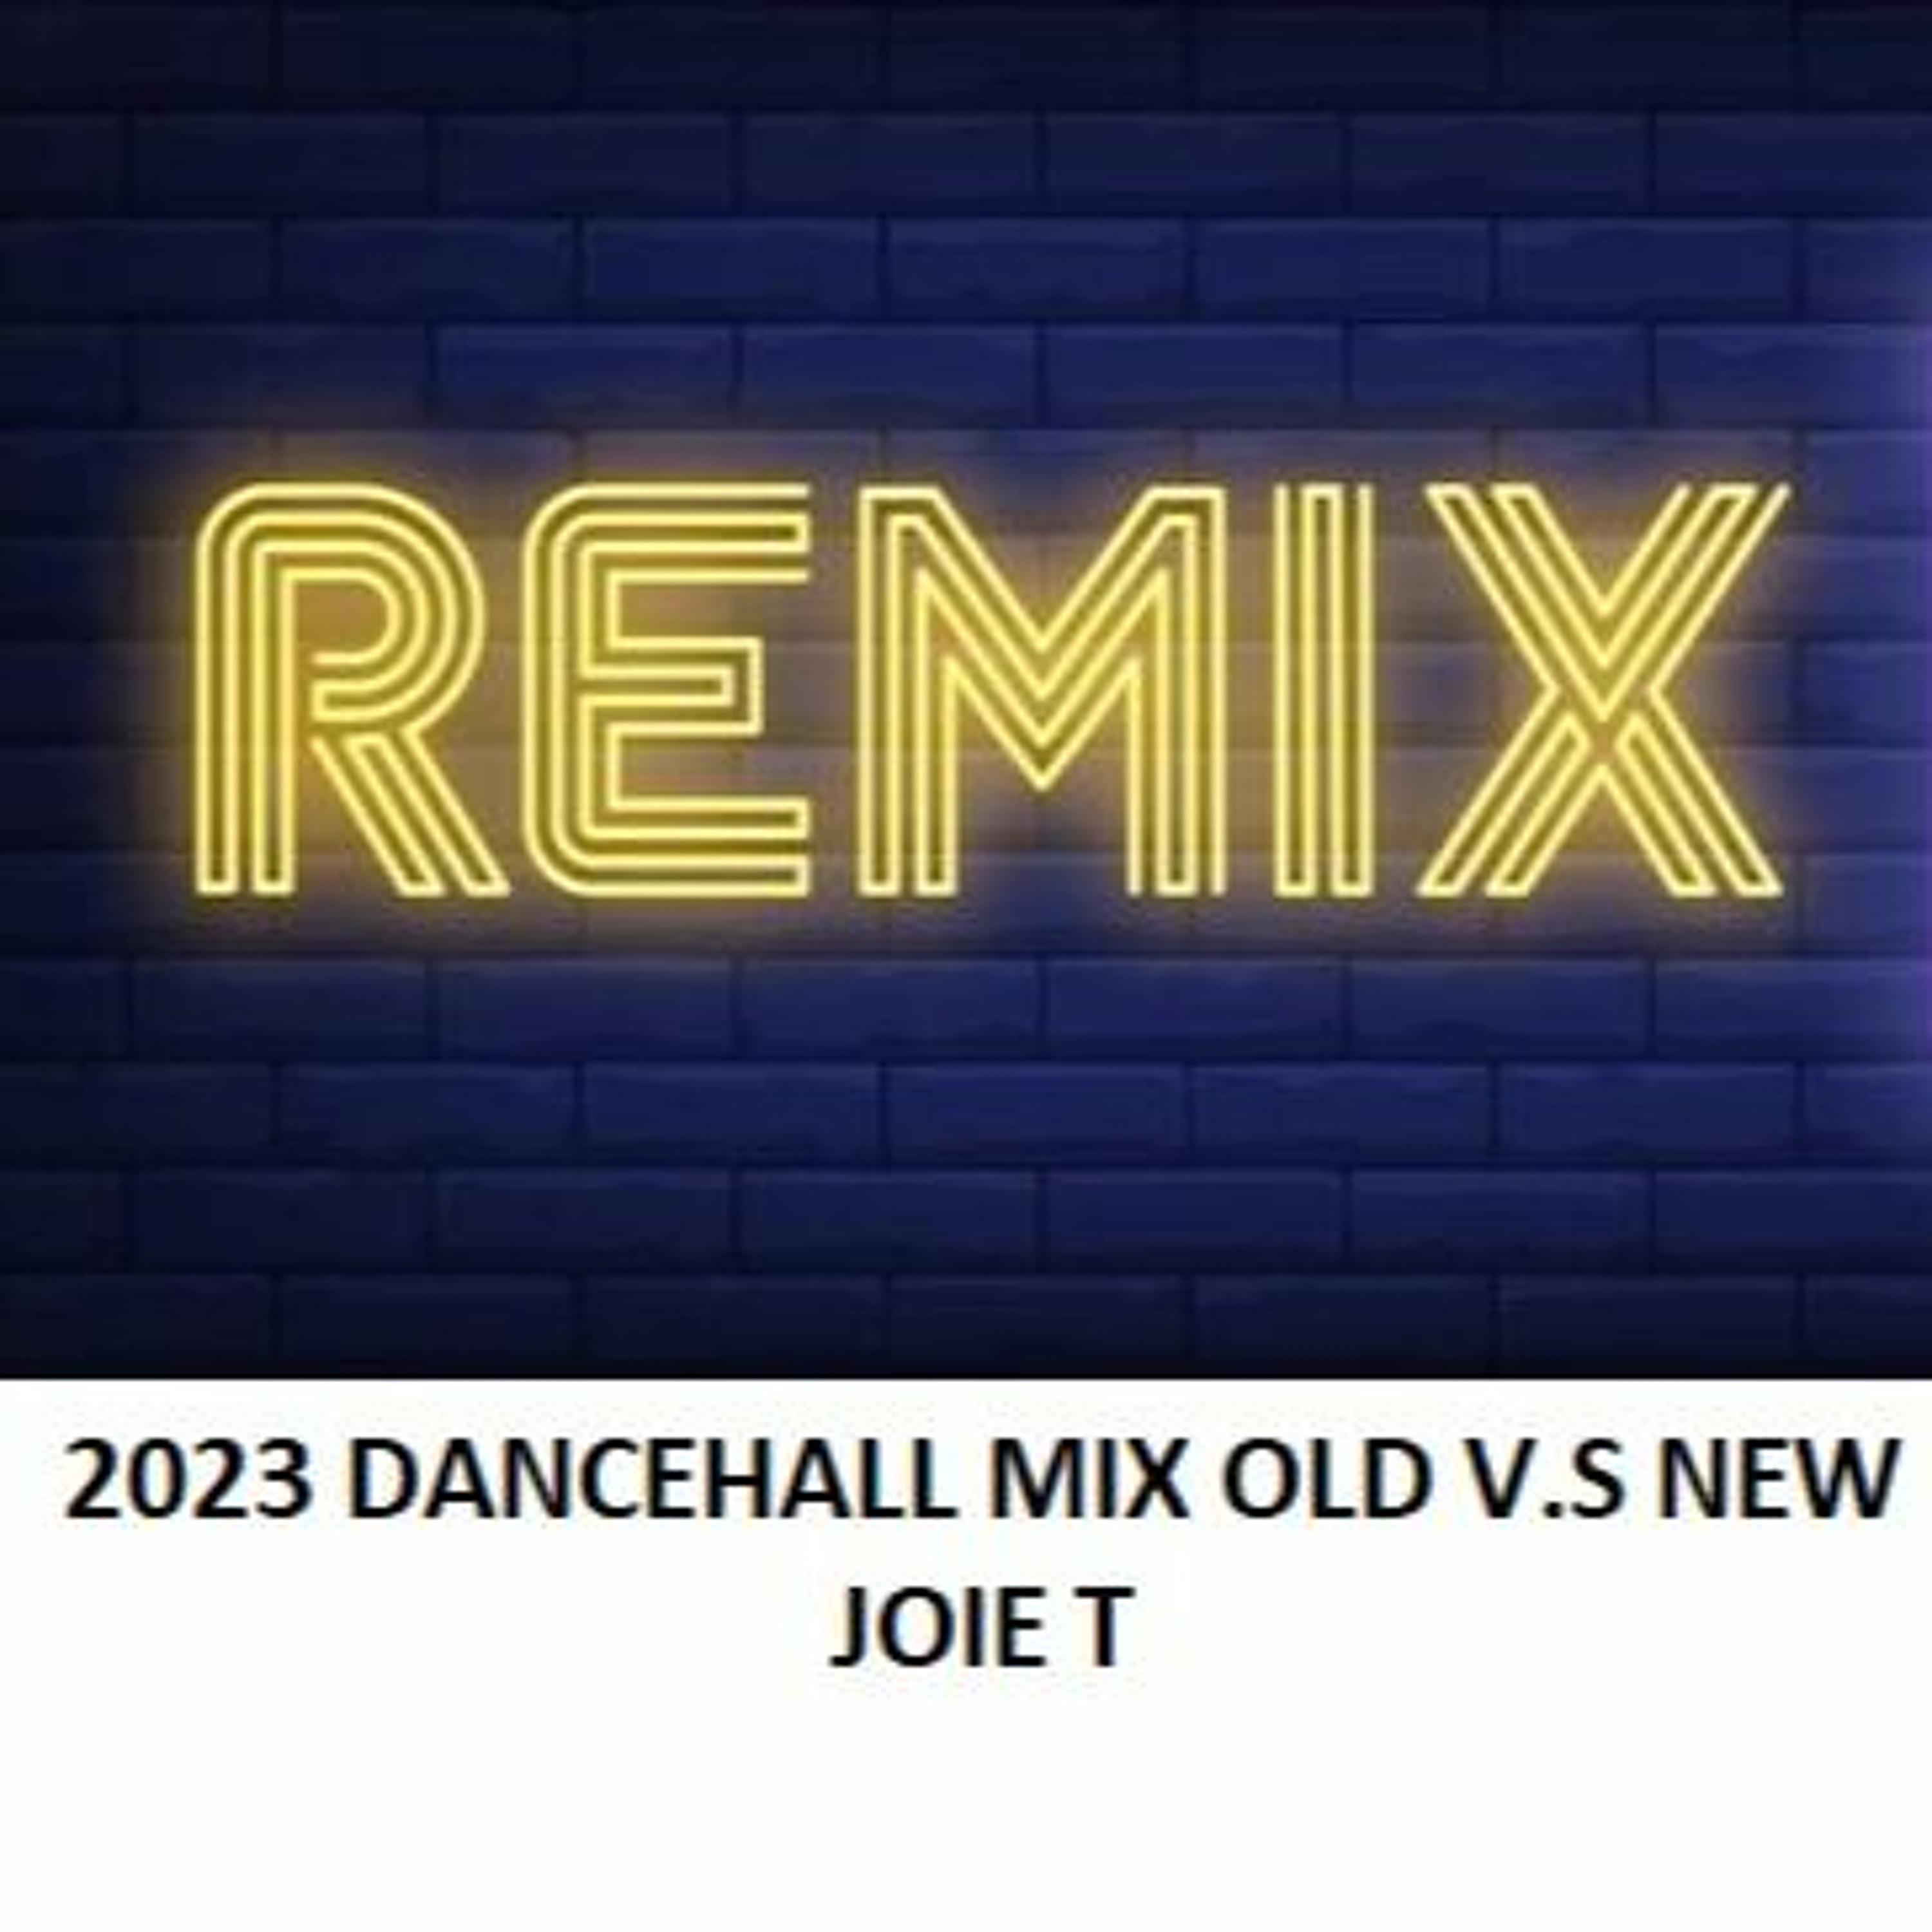 2023 DANCEHALL MIX. OLD V.S NEW. - Part 2 - JOIE T.